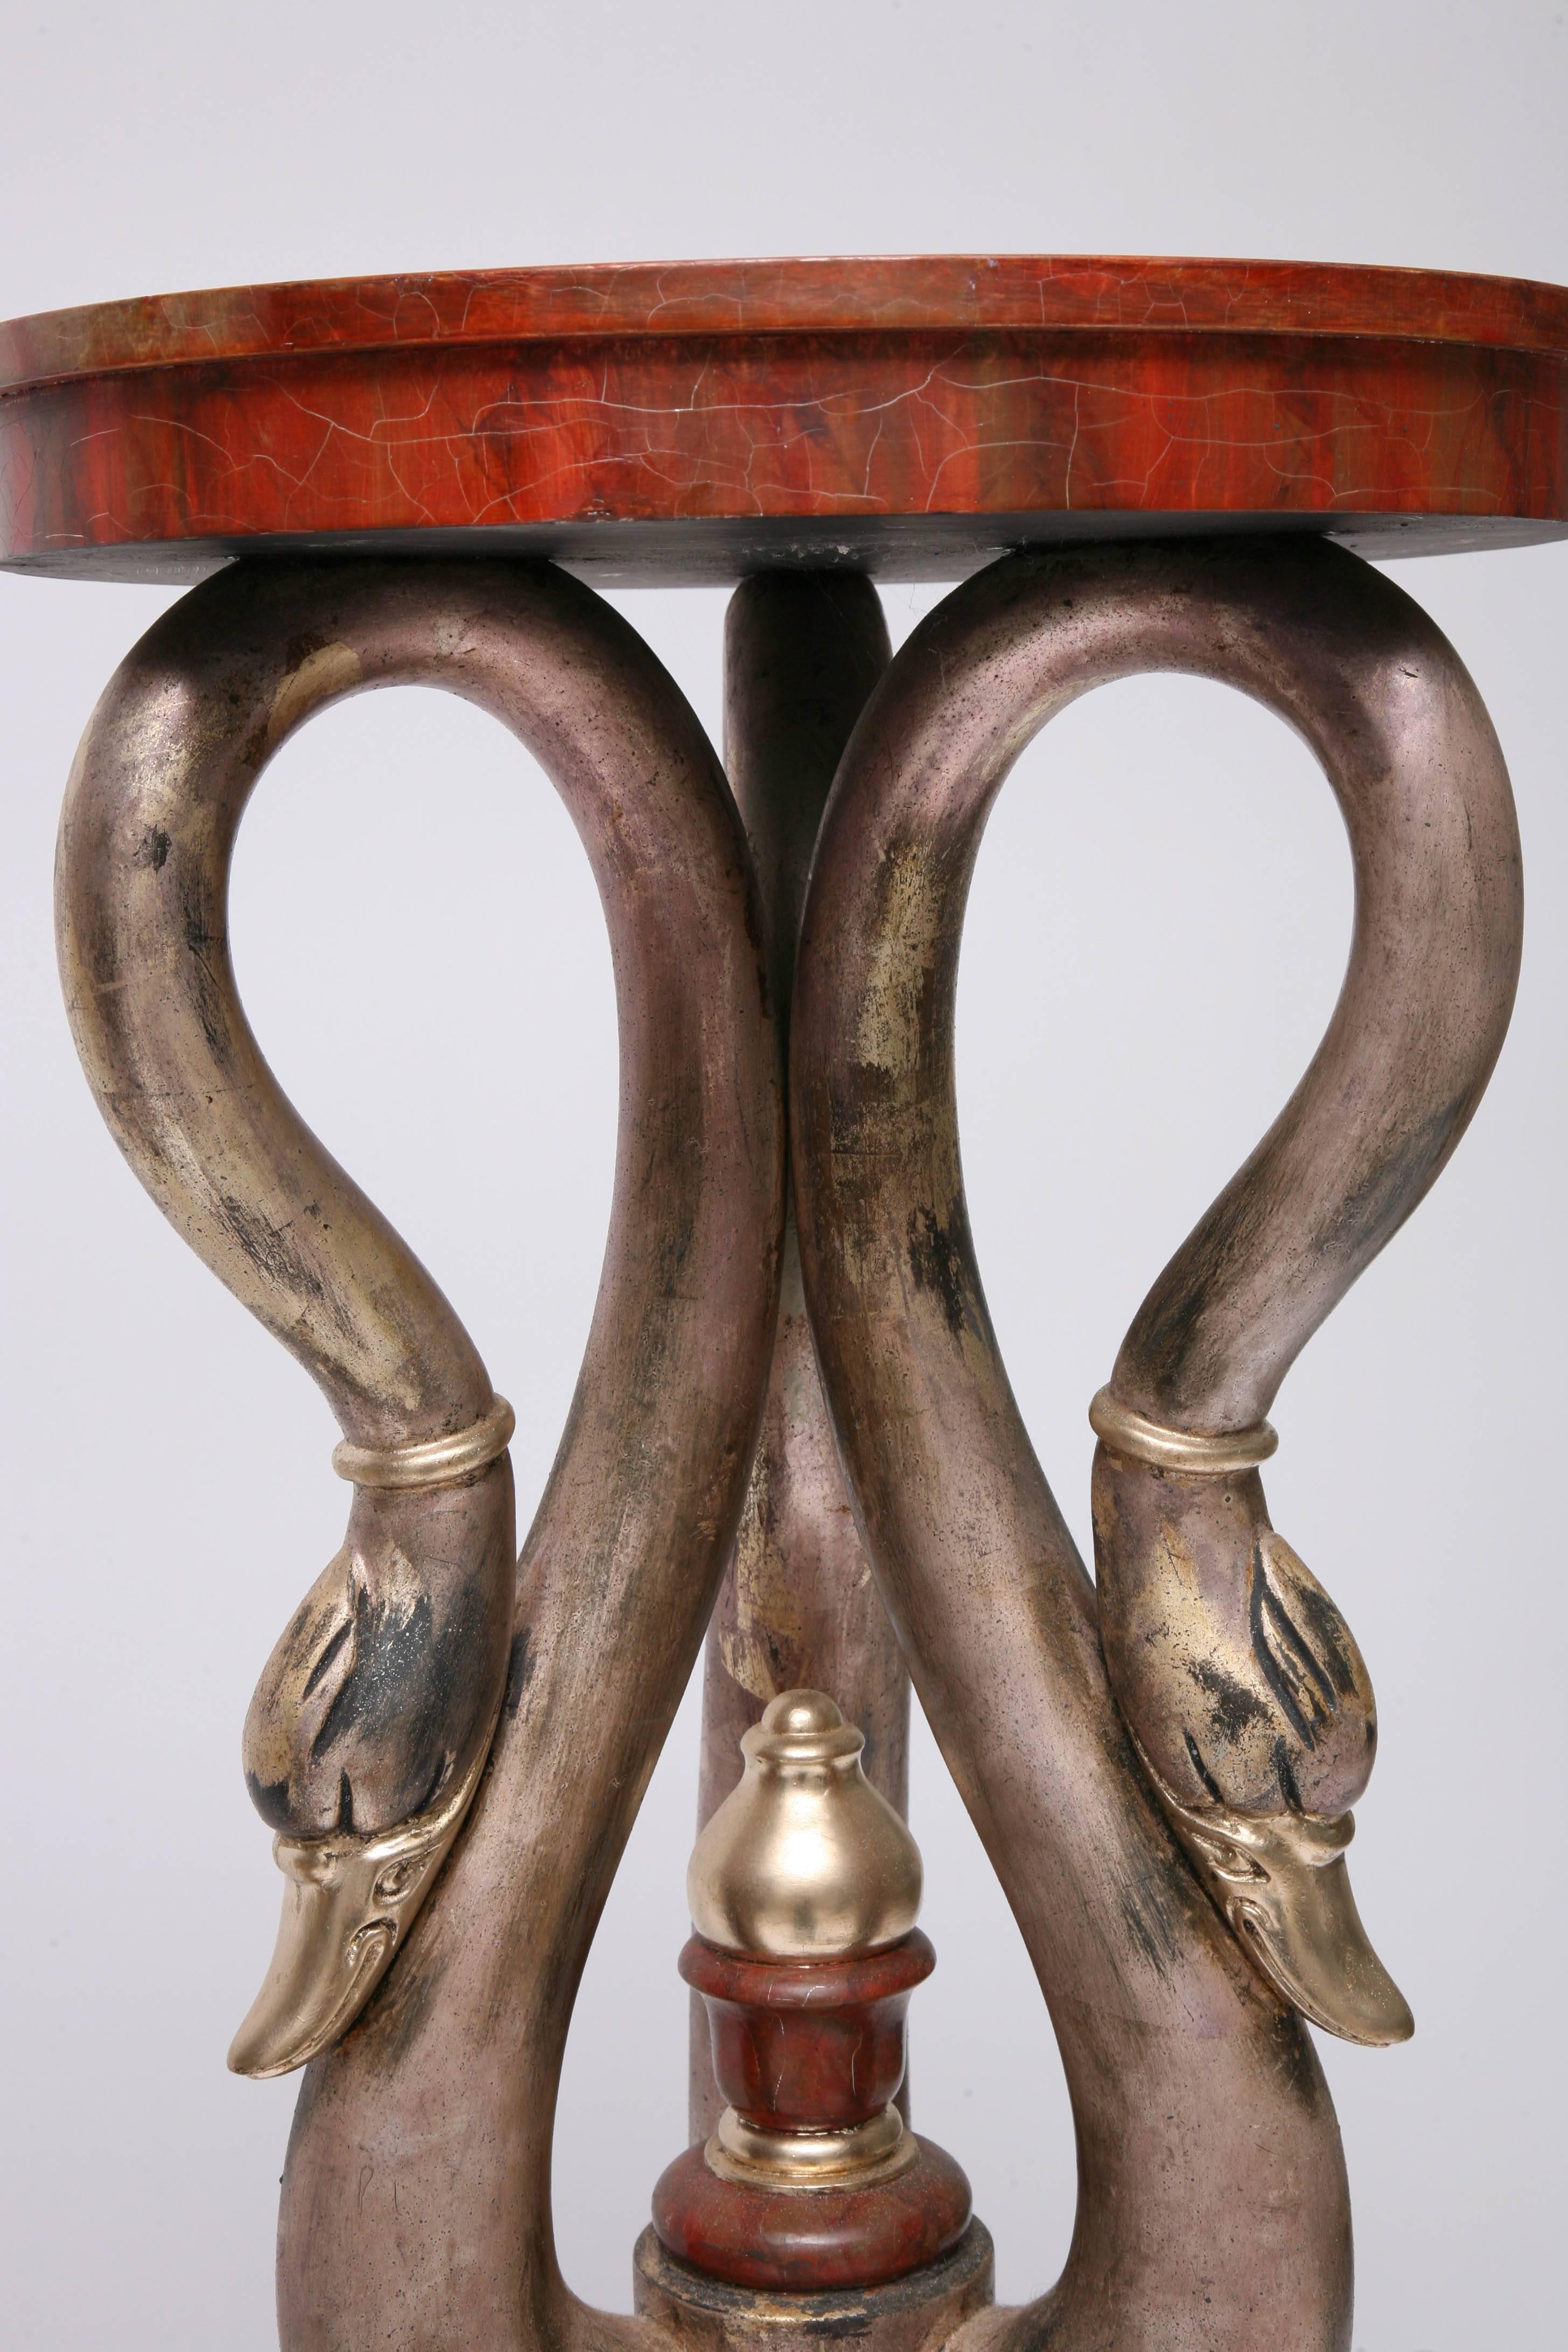 Painted Pair of Neoclassical, French Empire Style Swan Pedestals, Isabel O'neil Studio